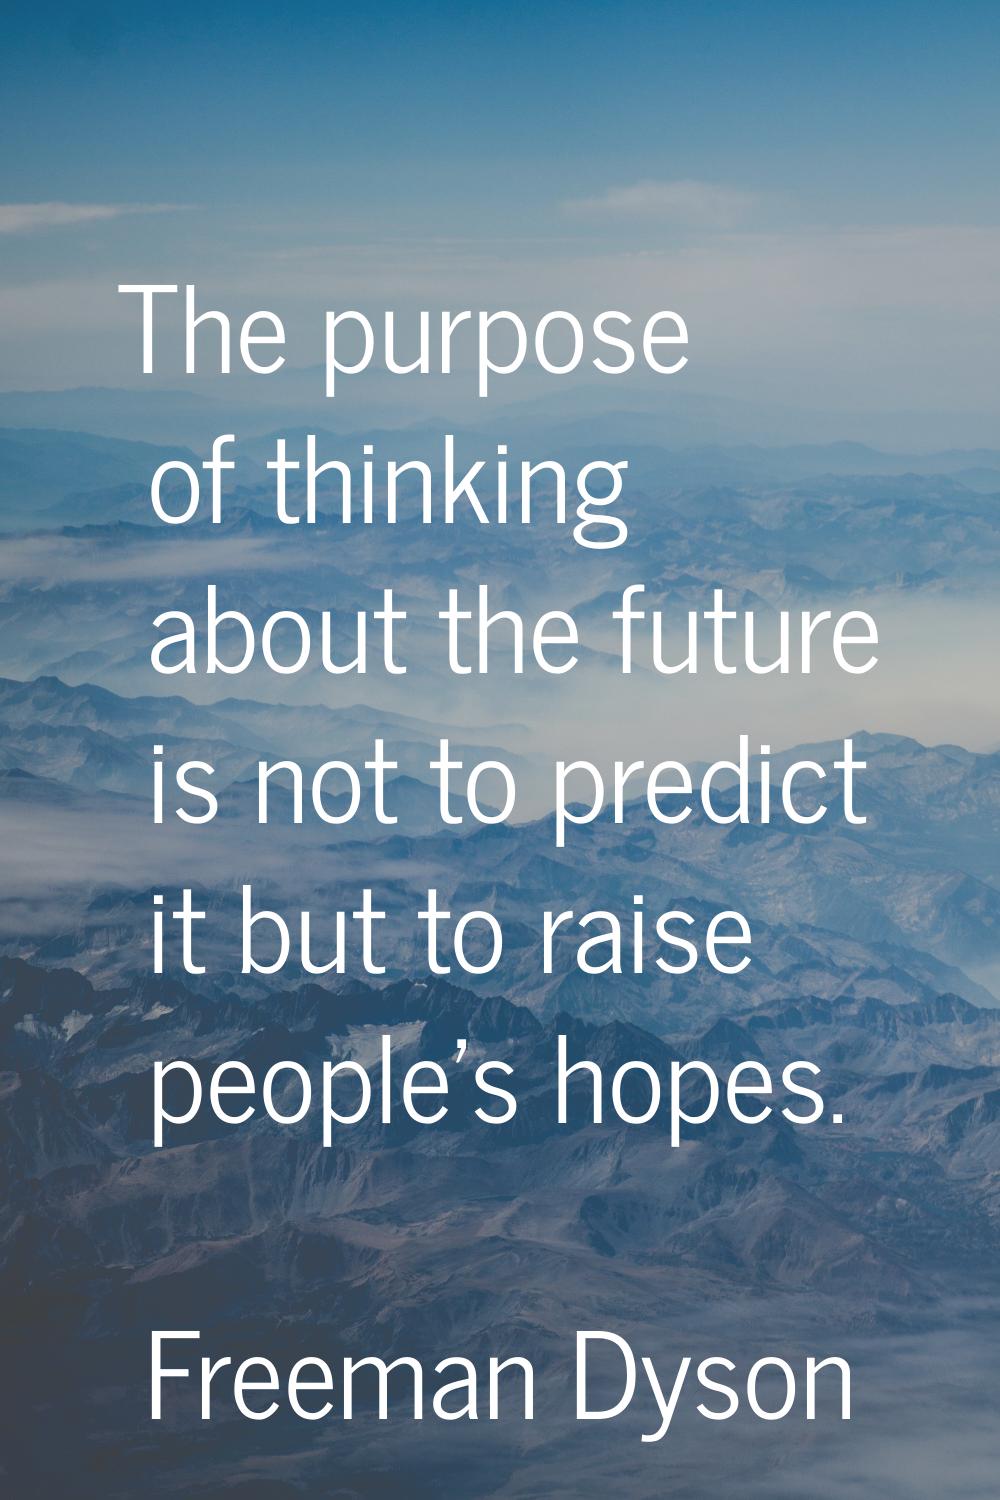 The purpose of thinking about the future is not to predict it but to raise people's hopes.